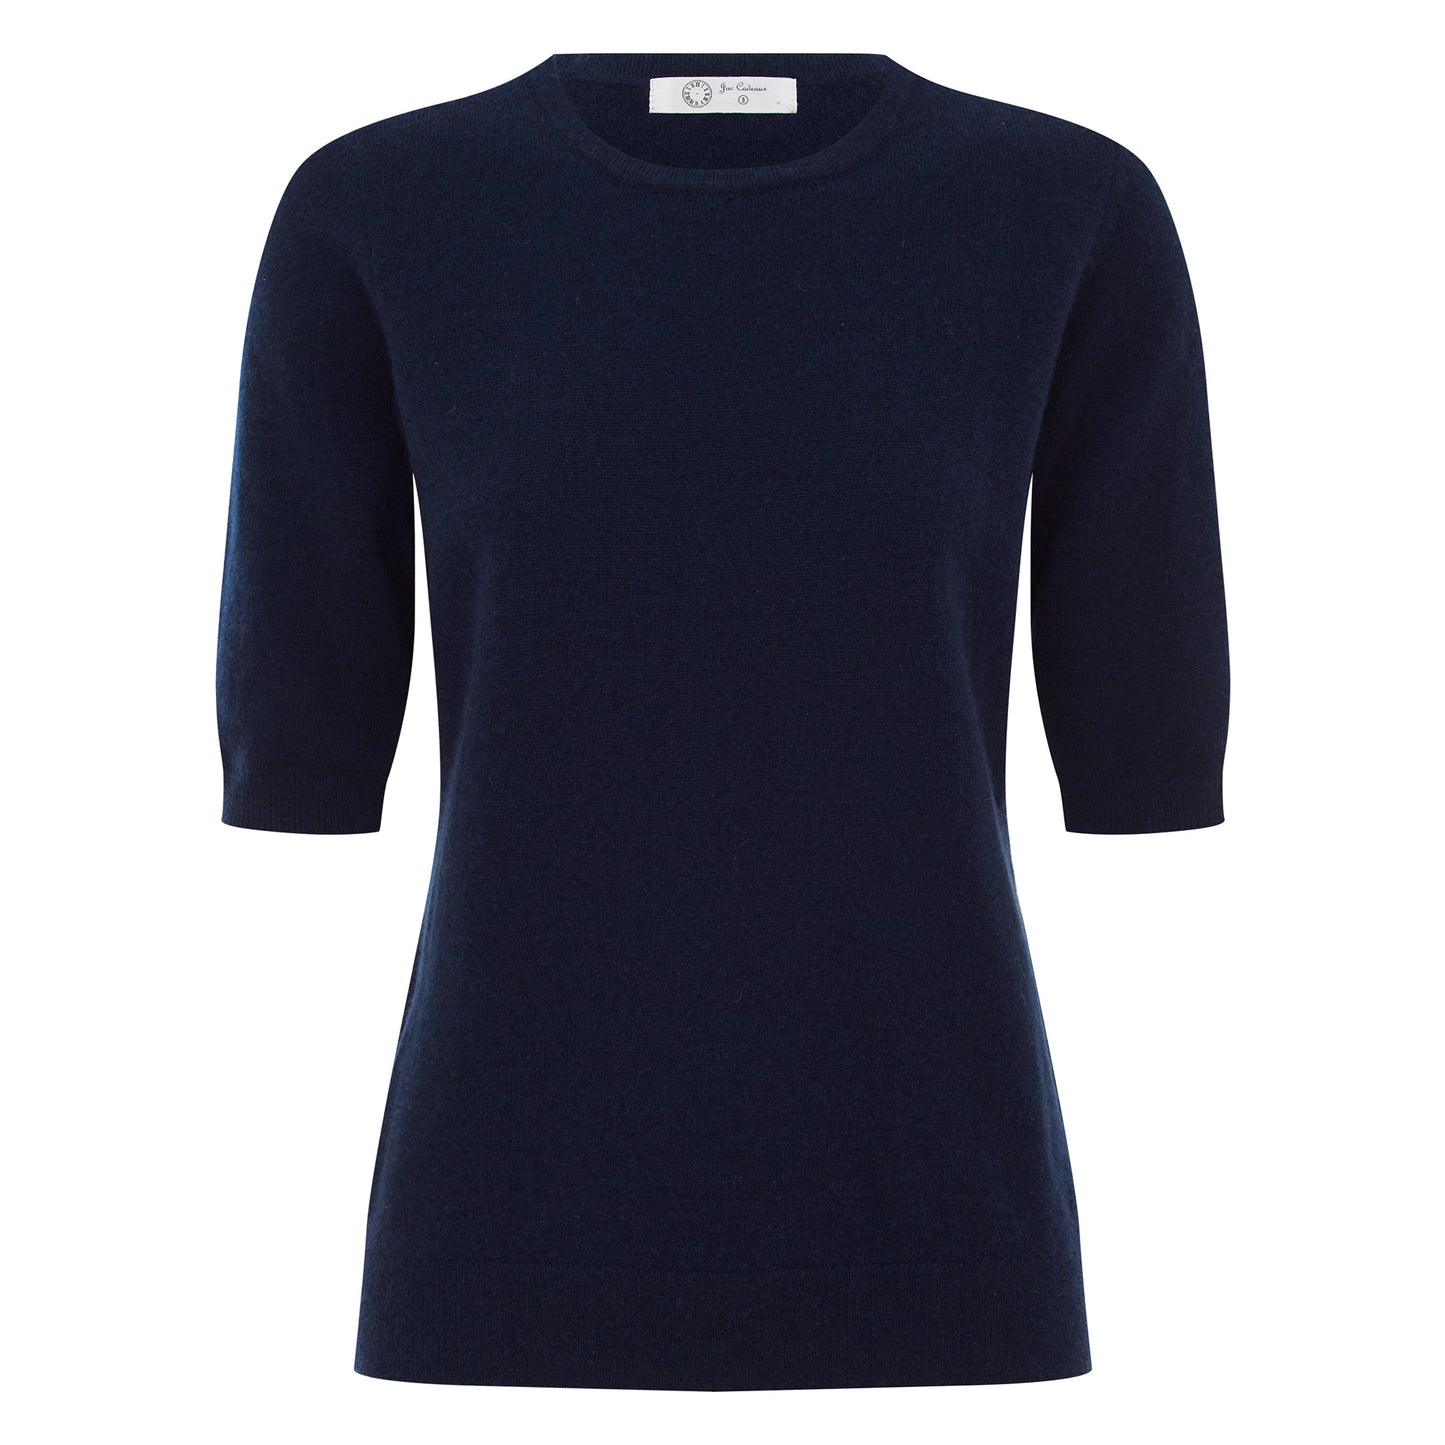 Margeaux Knit Top In Cashmere & Wool - NAVY BLUE